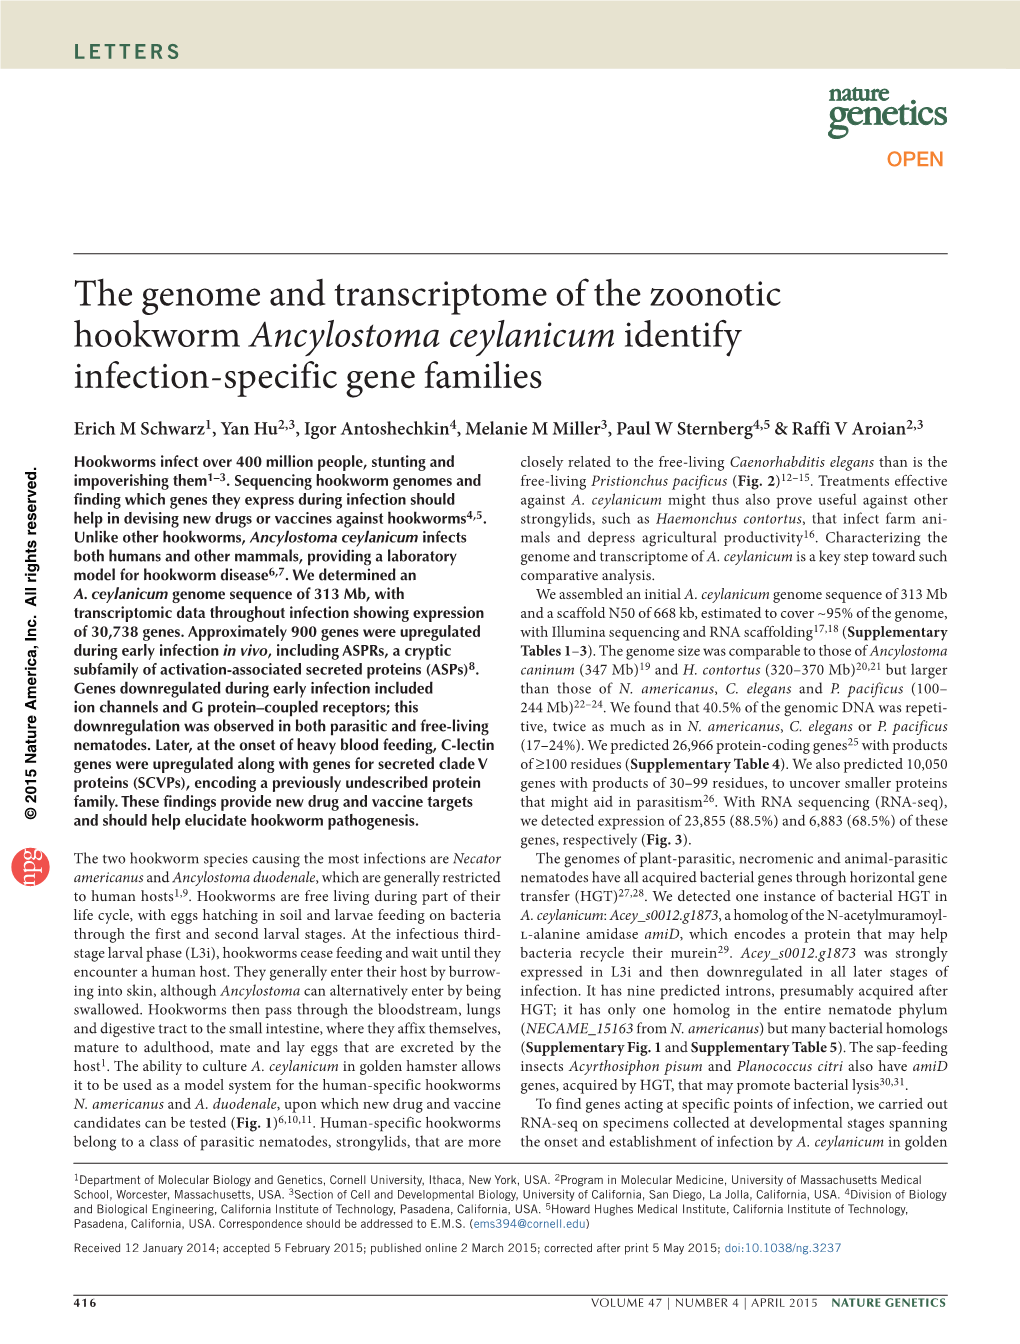 The Genome and Transcriptome of the Zoonotic Hookworm Ancylostoma